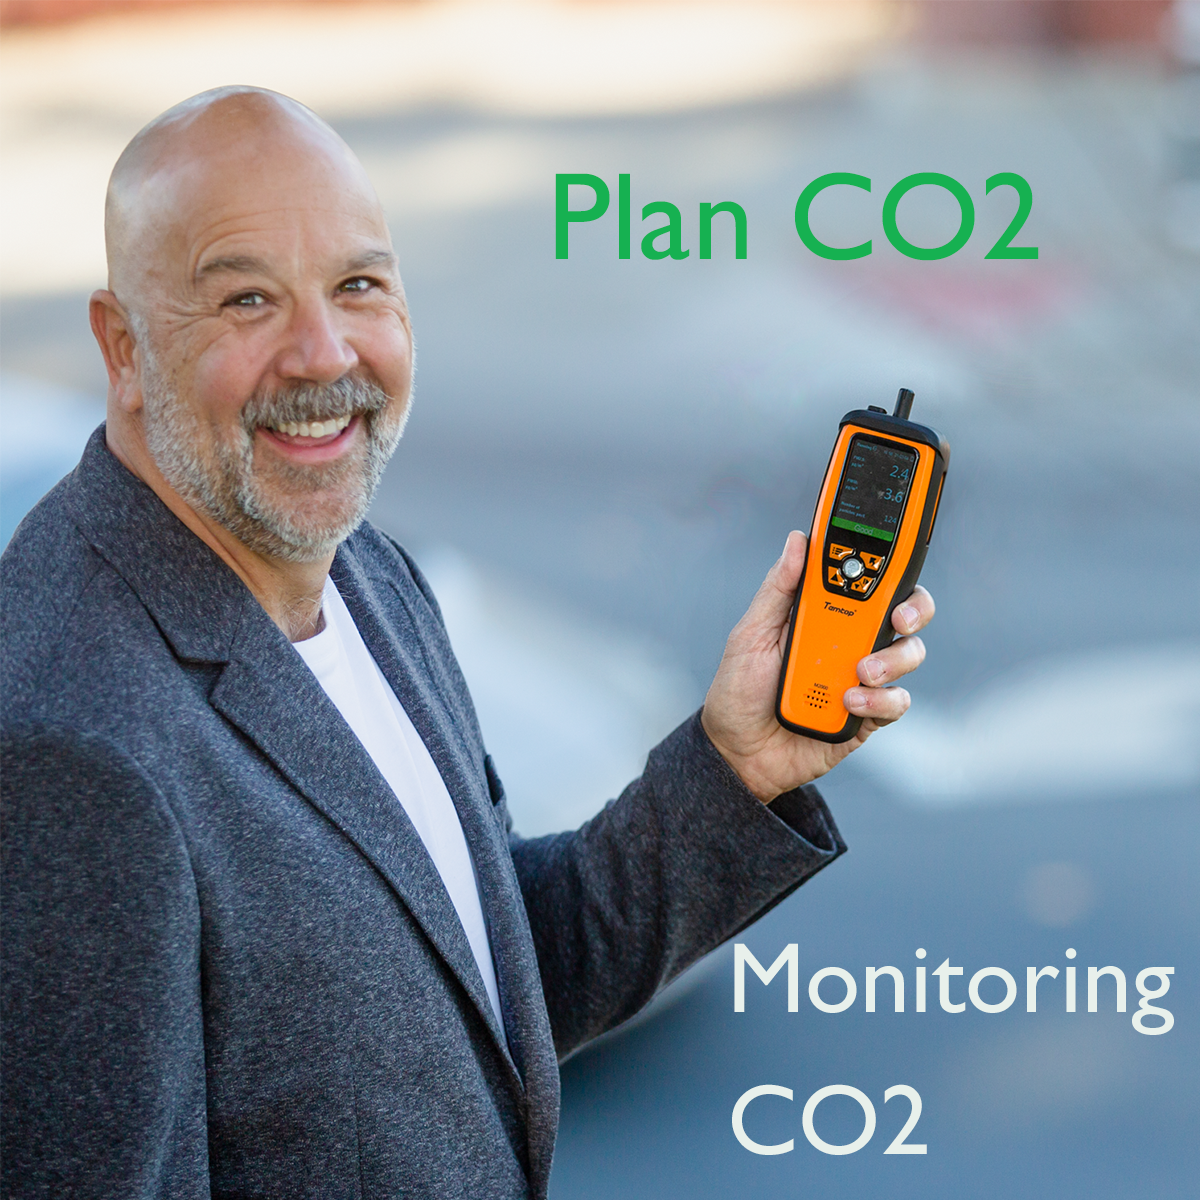 Plan CO2 — A Thing or Two About Monitoring CO2